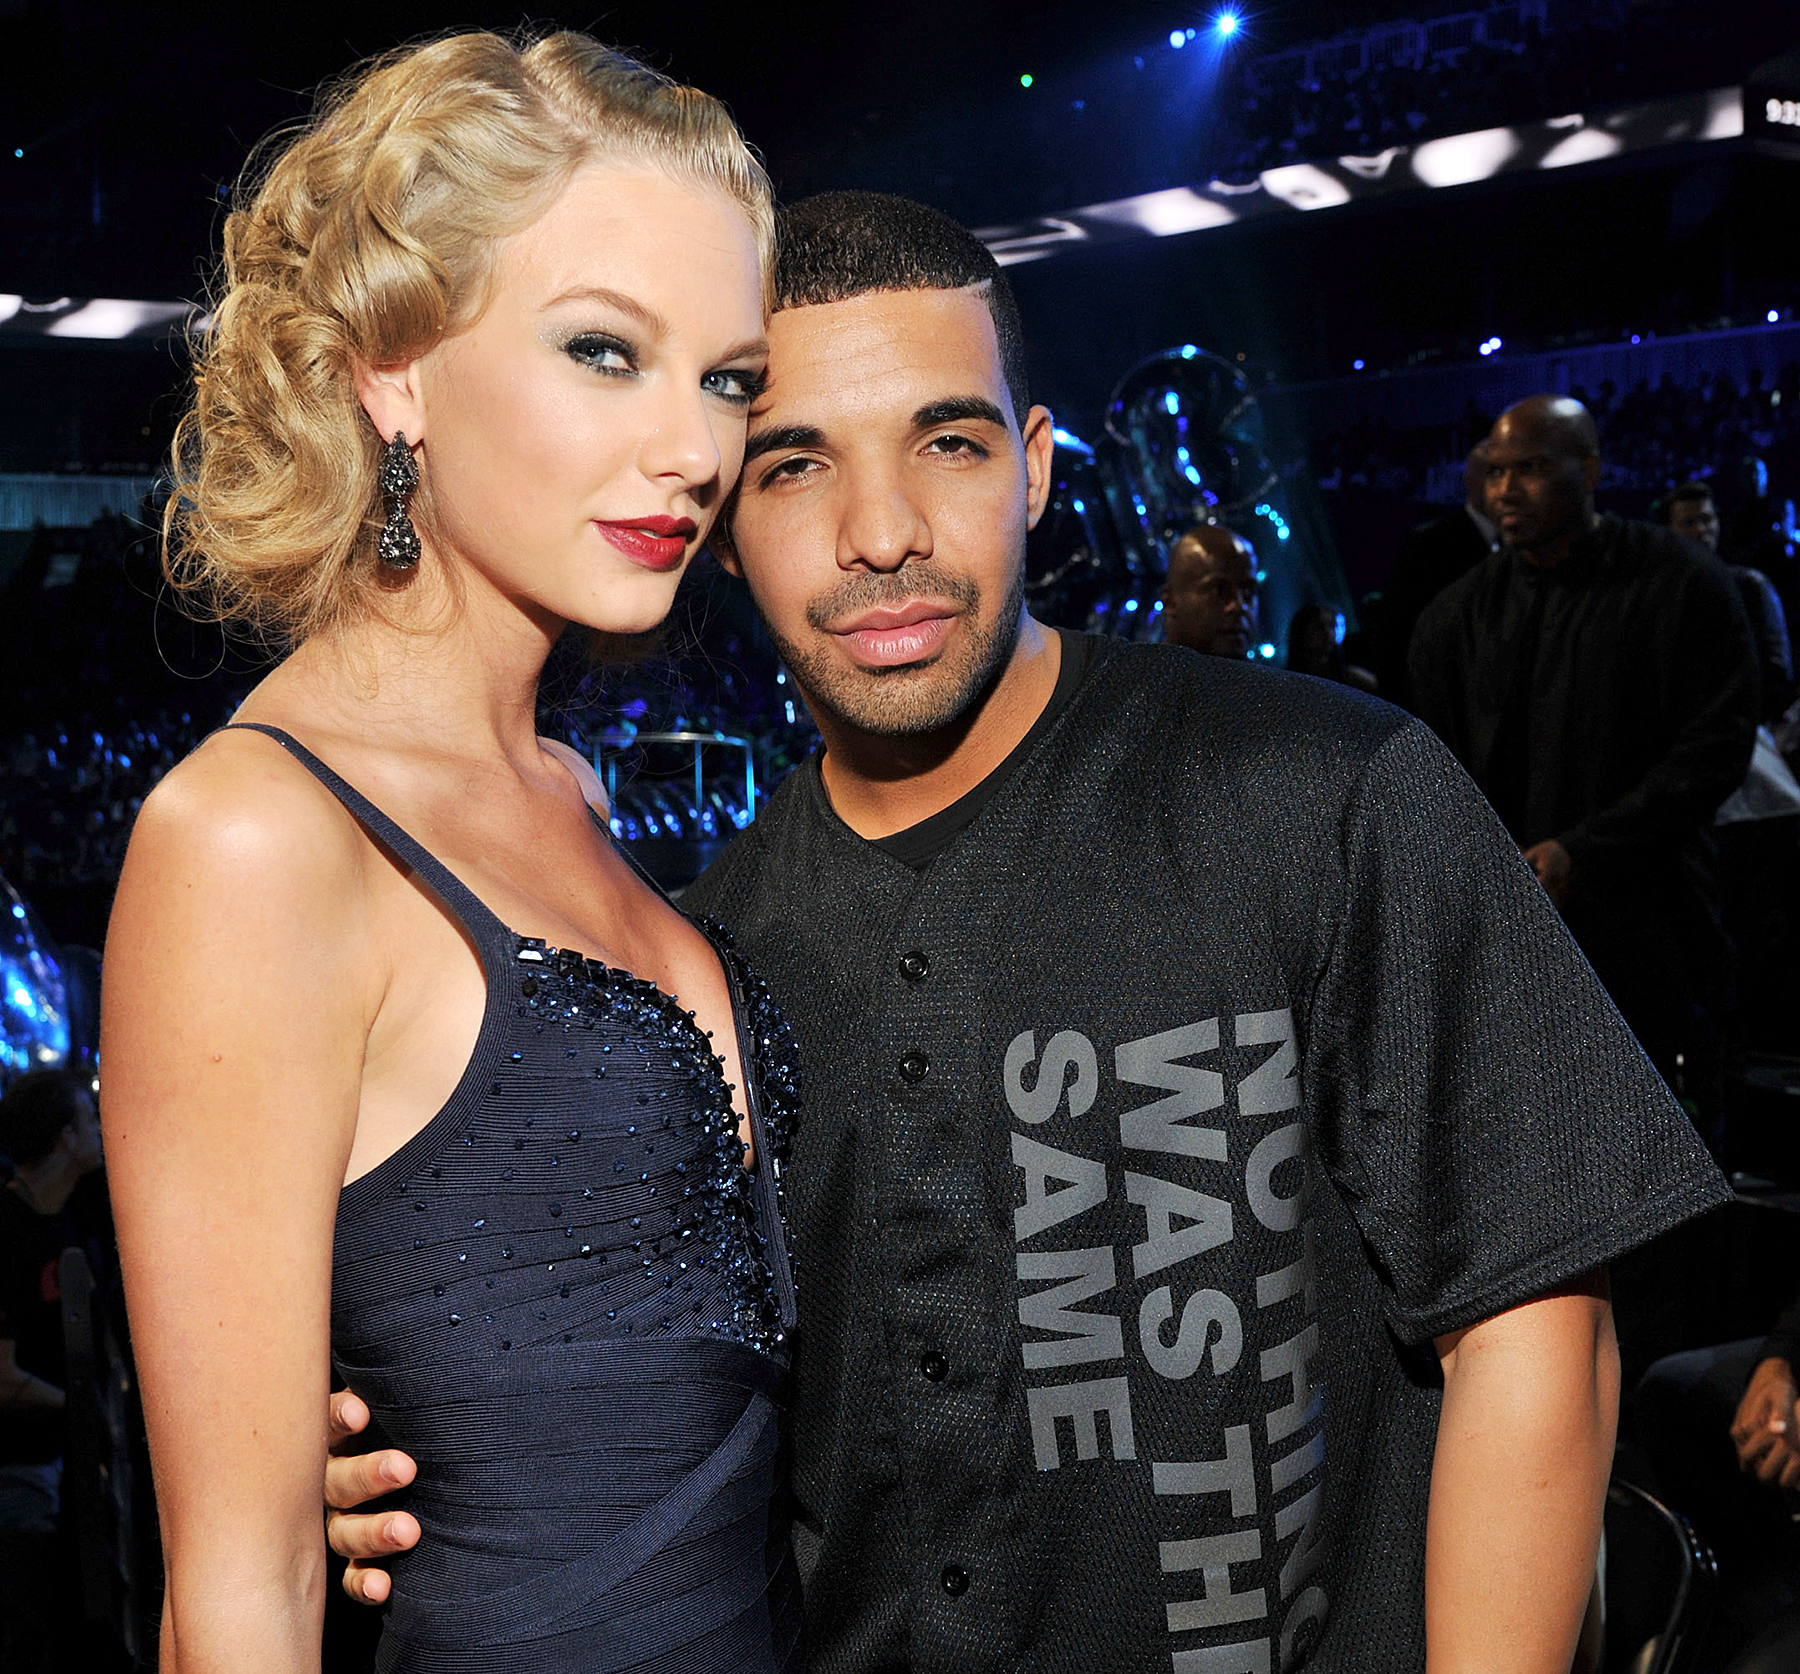 Who is dating taylor swift 2013